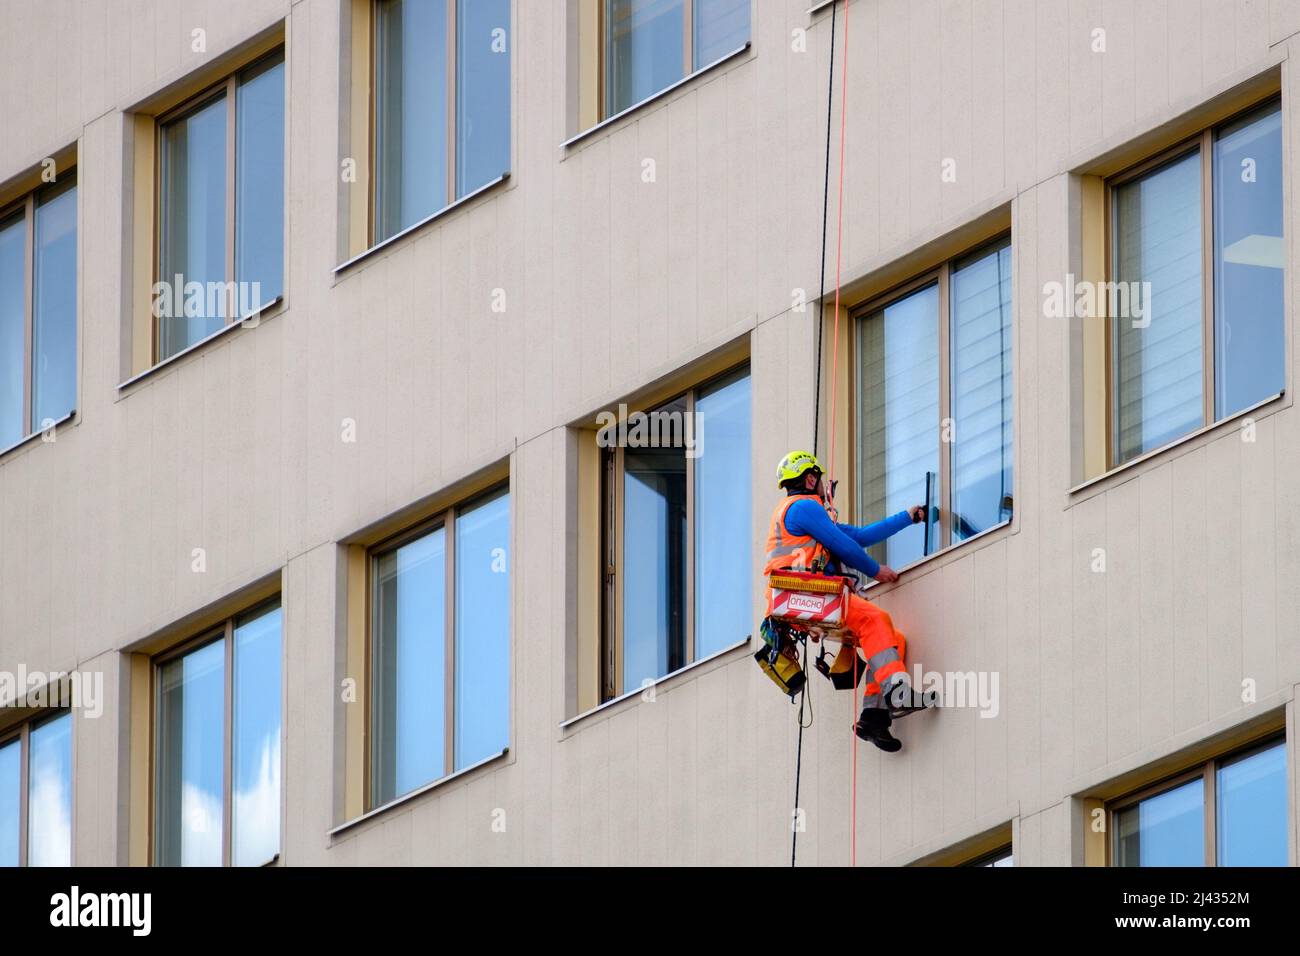 Minsk, Belarus - April 11, 2022: Industrial climber washes windows on facade of a building. Side view Stock Photo